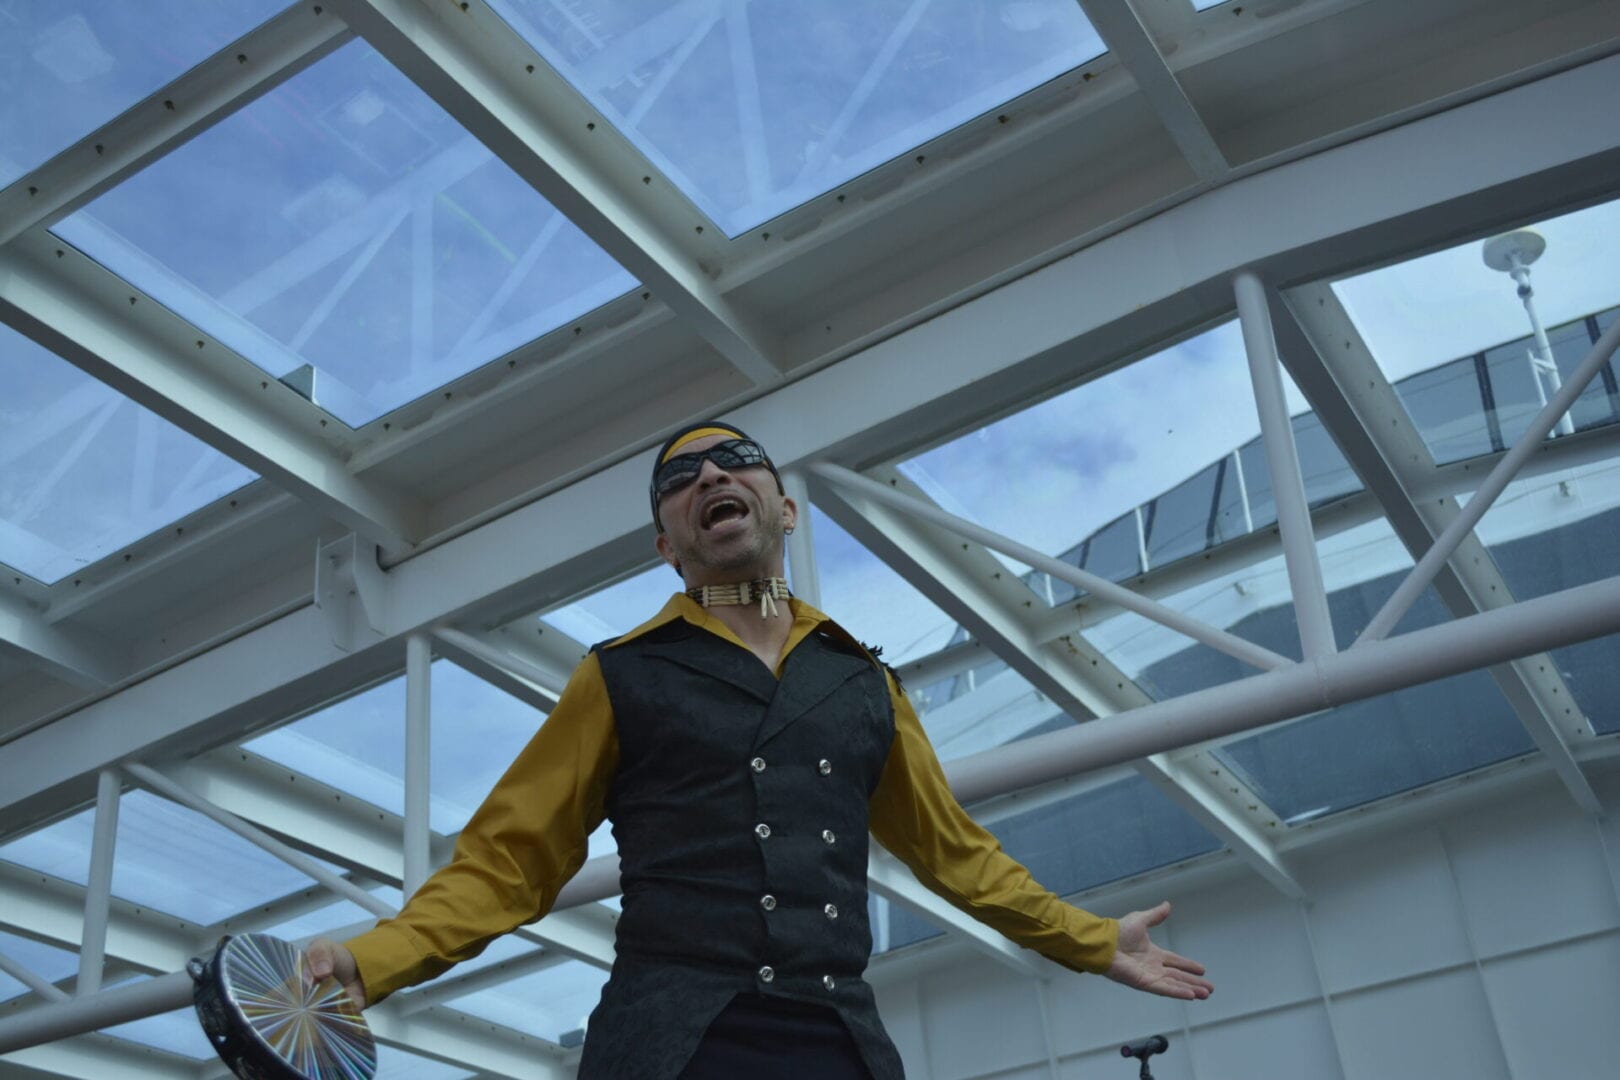 A man in a yellow shirt and black vest standing under a glass ceiling.